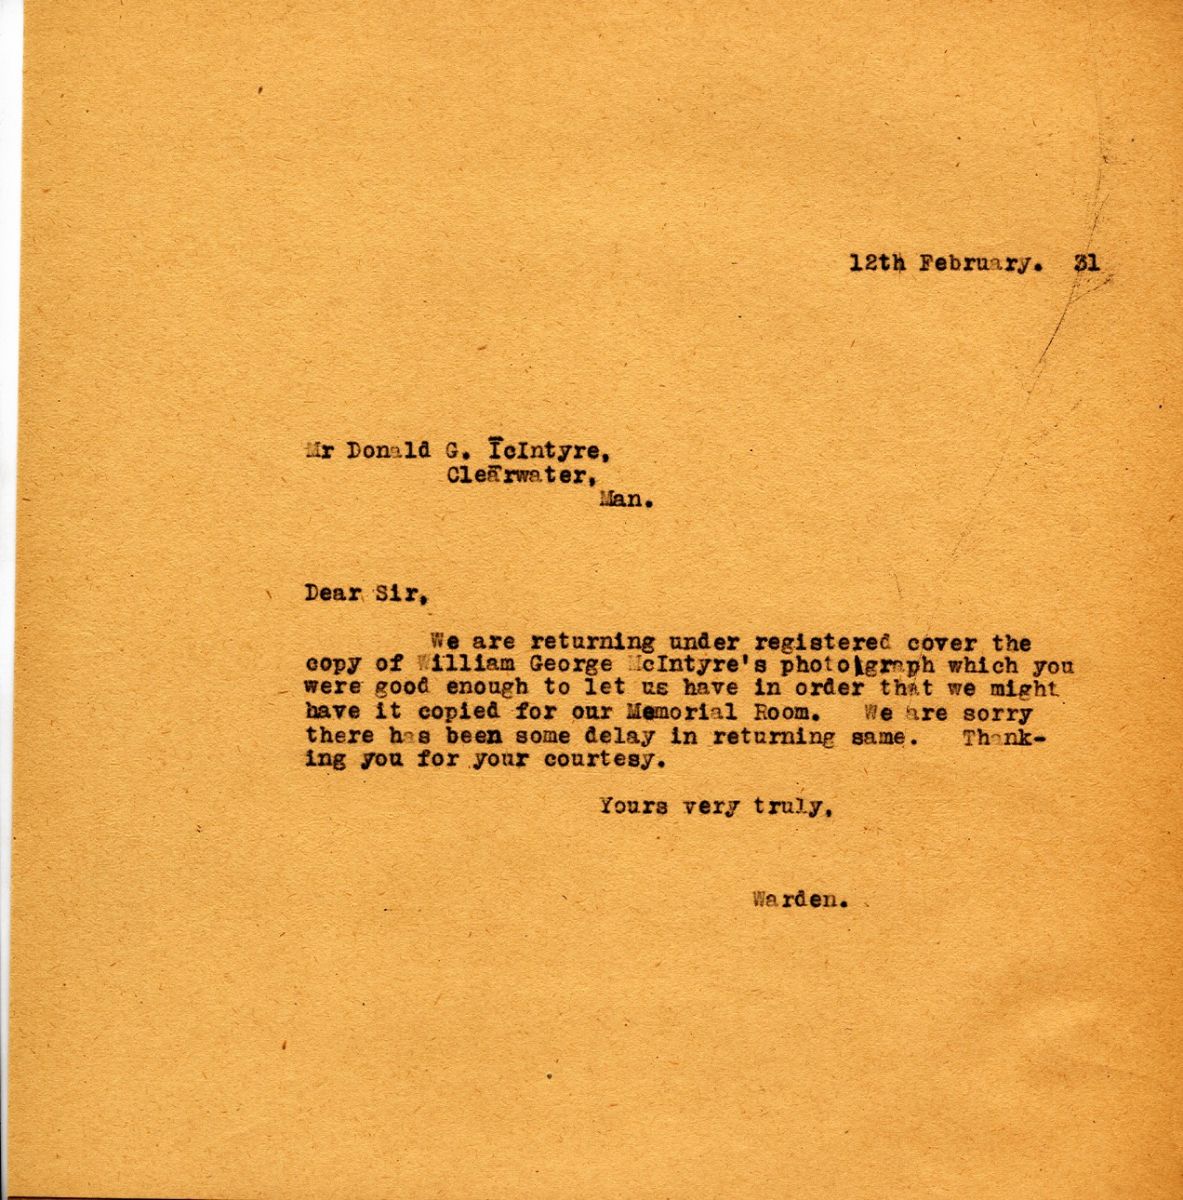 Letter from the Warden to Mr. Donald G. McIntyre, 12th February 1931